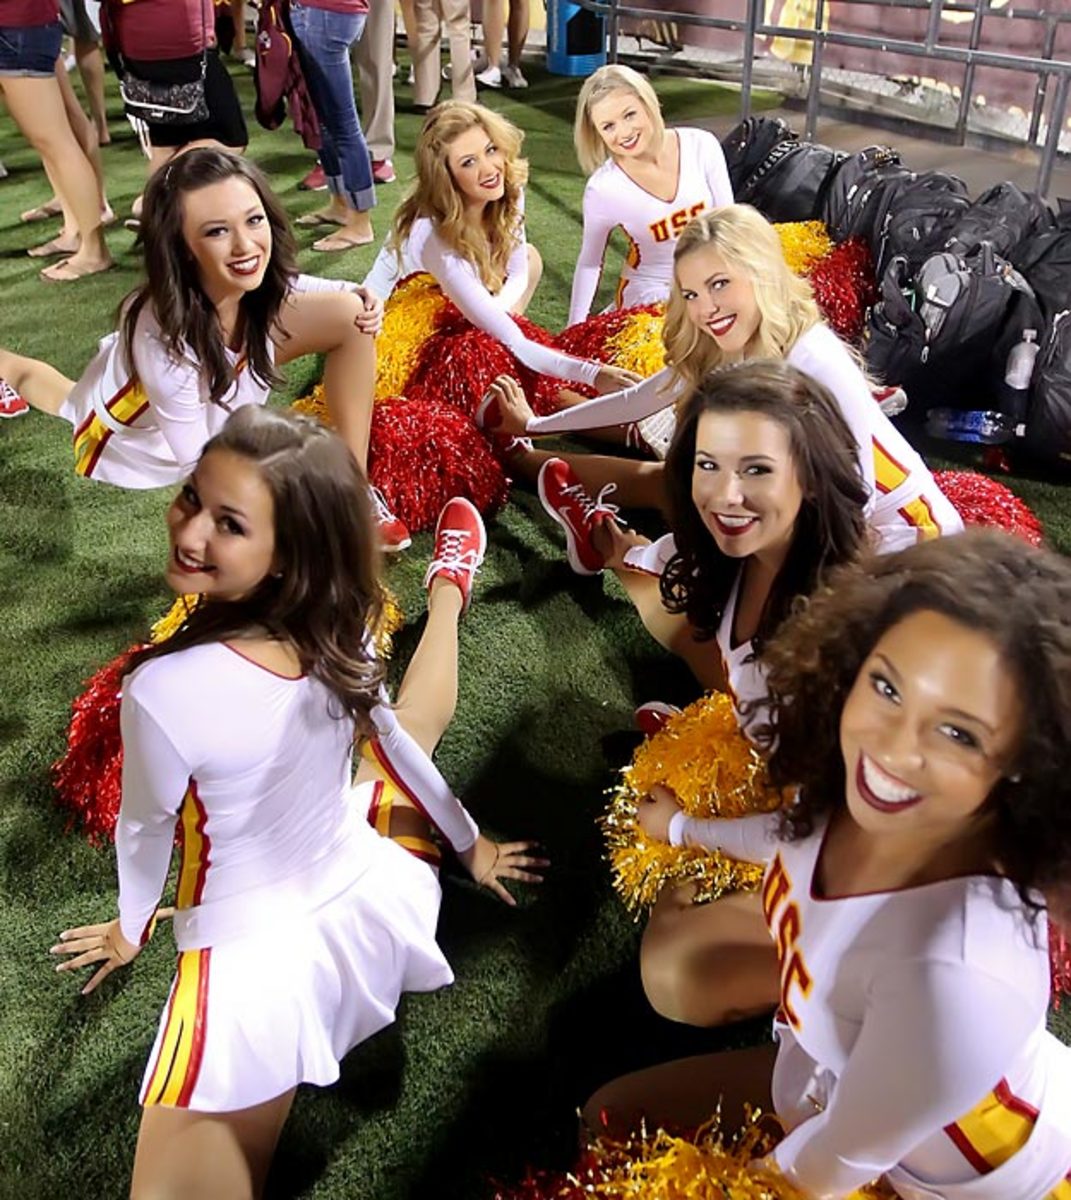 140515123956-02-perry-usc-game-action-a08x0803-single-image-cut.jpg